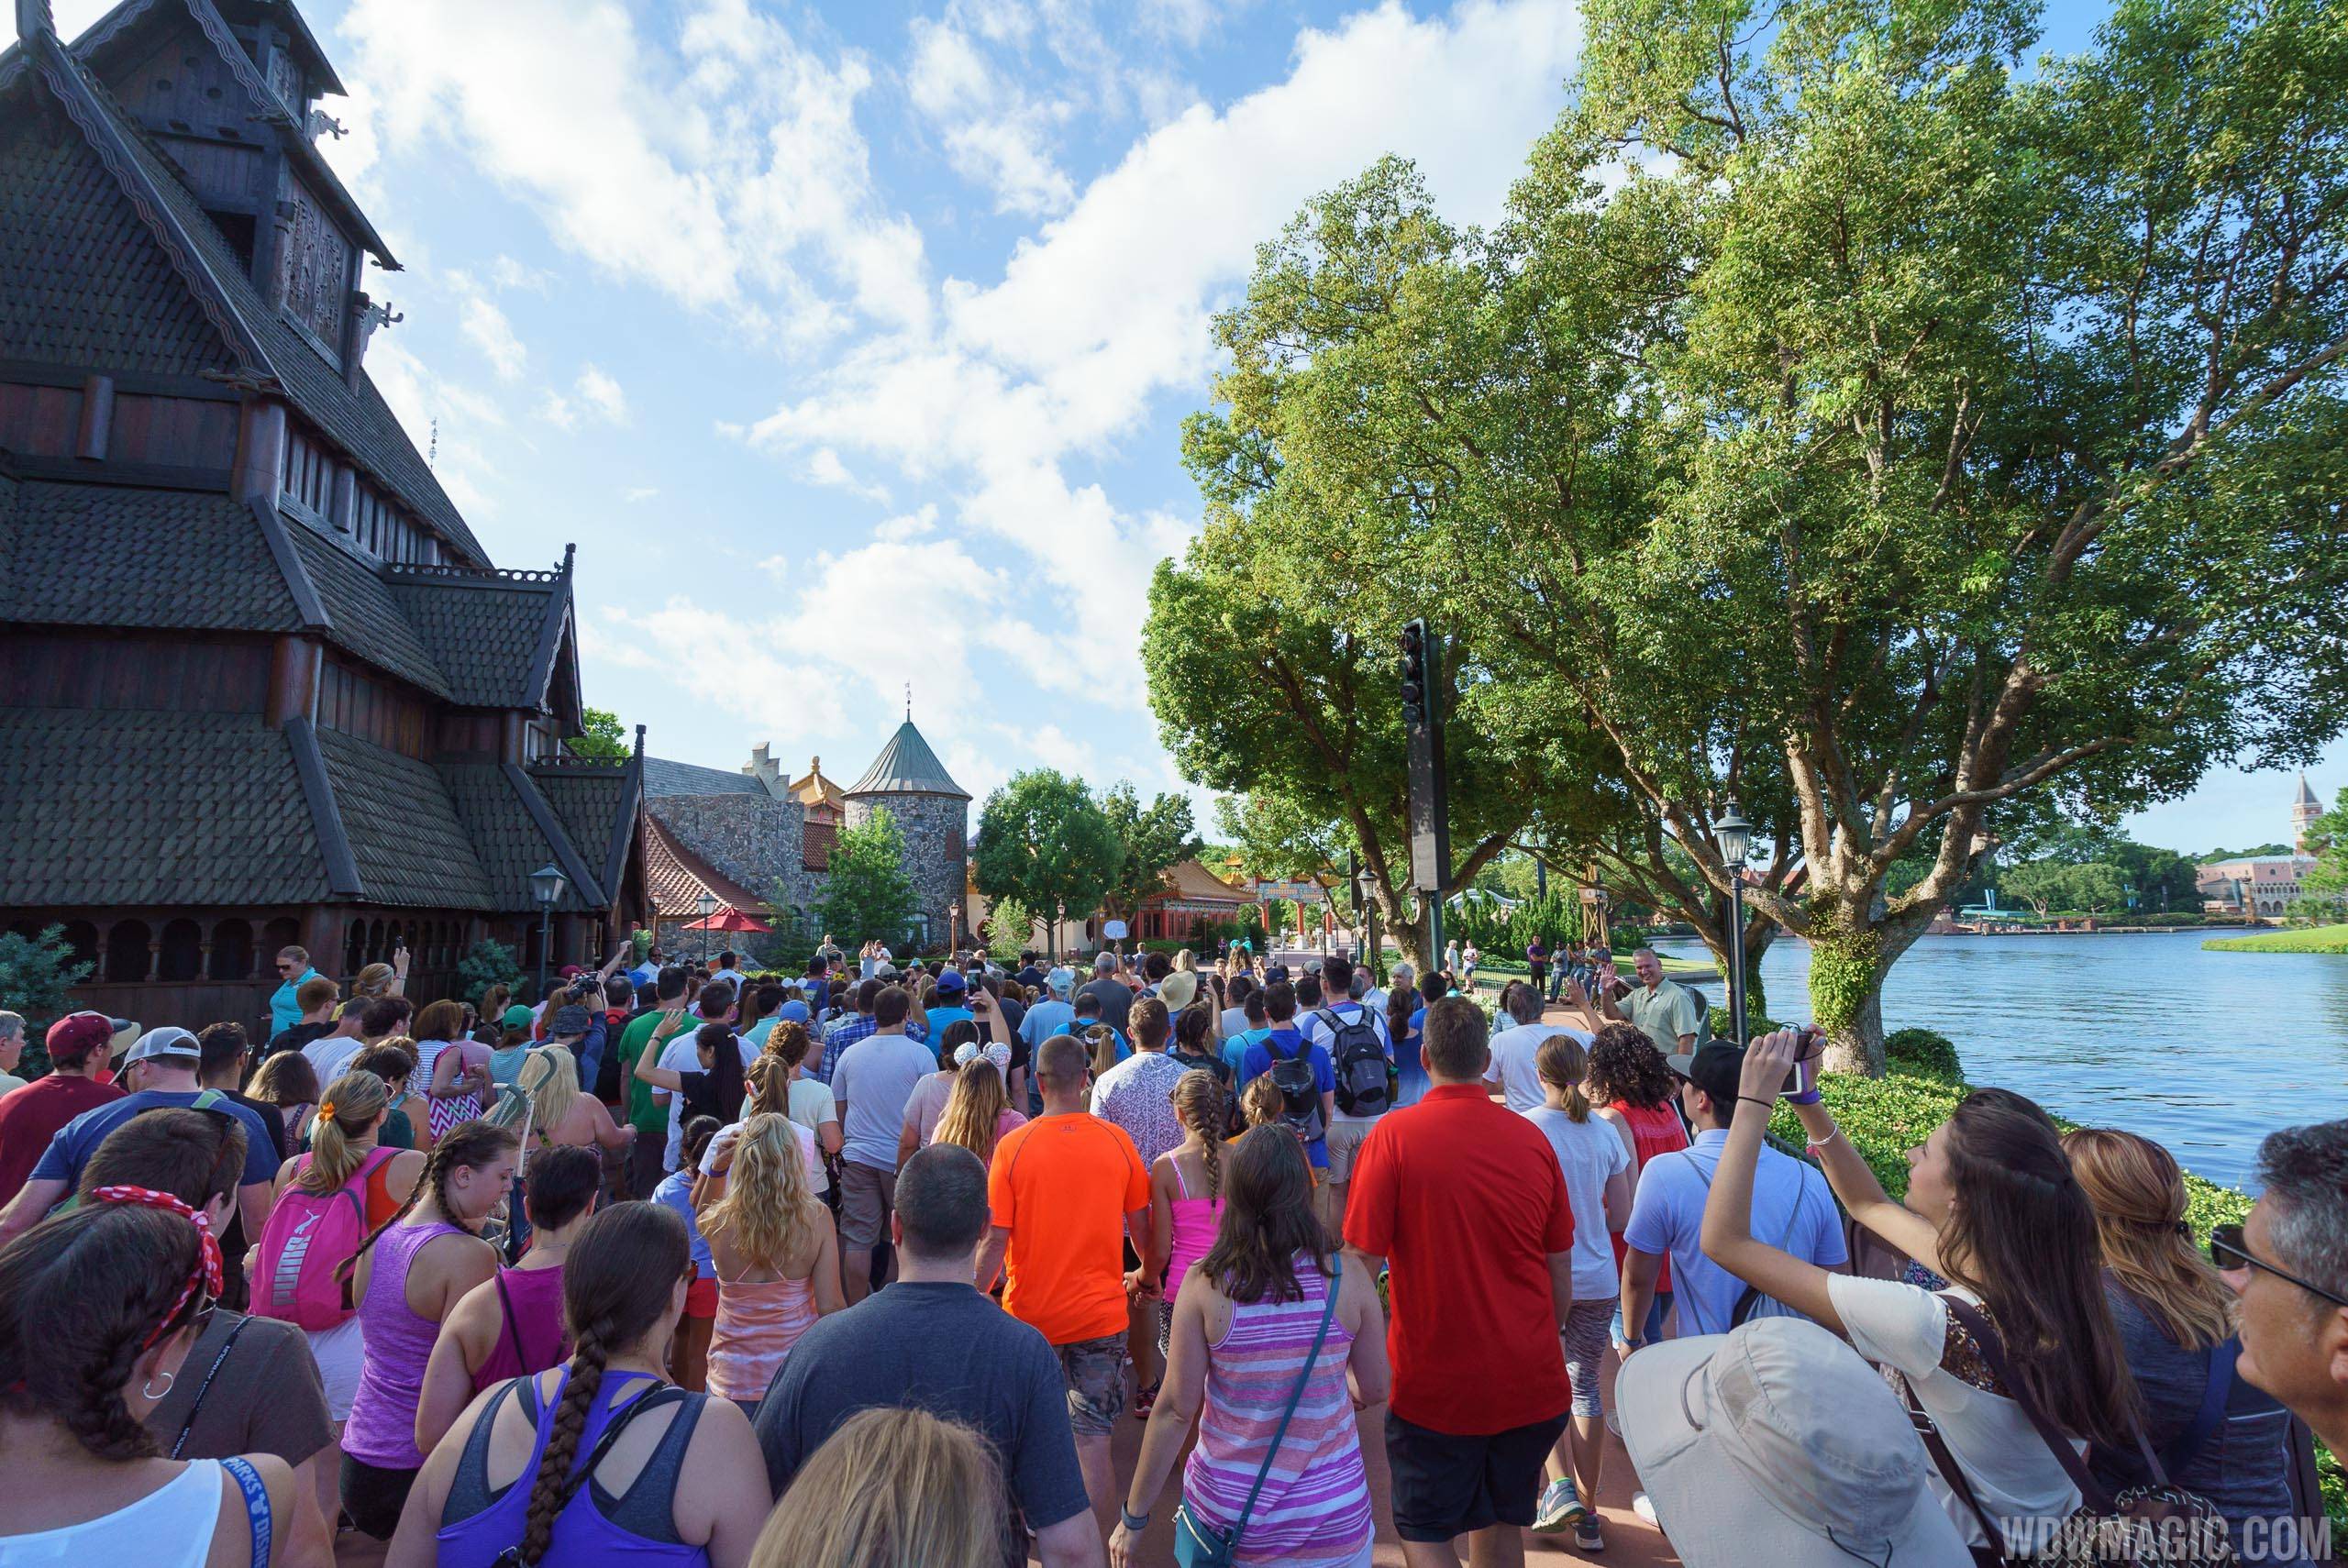 Crowds on opening morning at Frozen Ever After